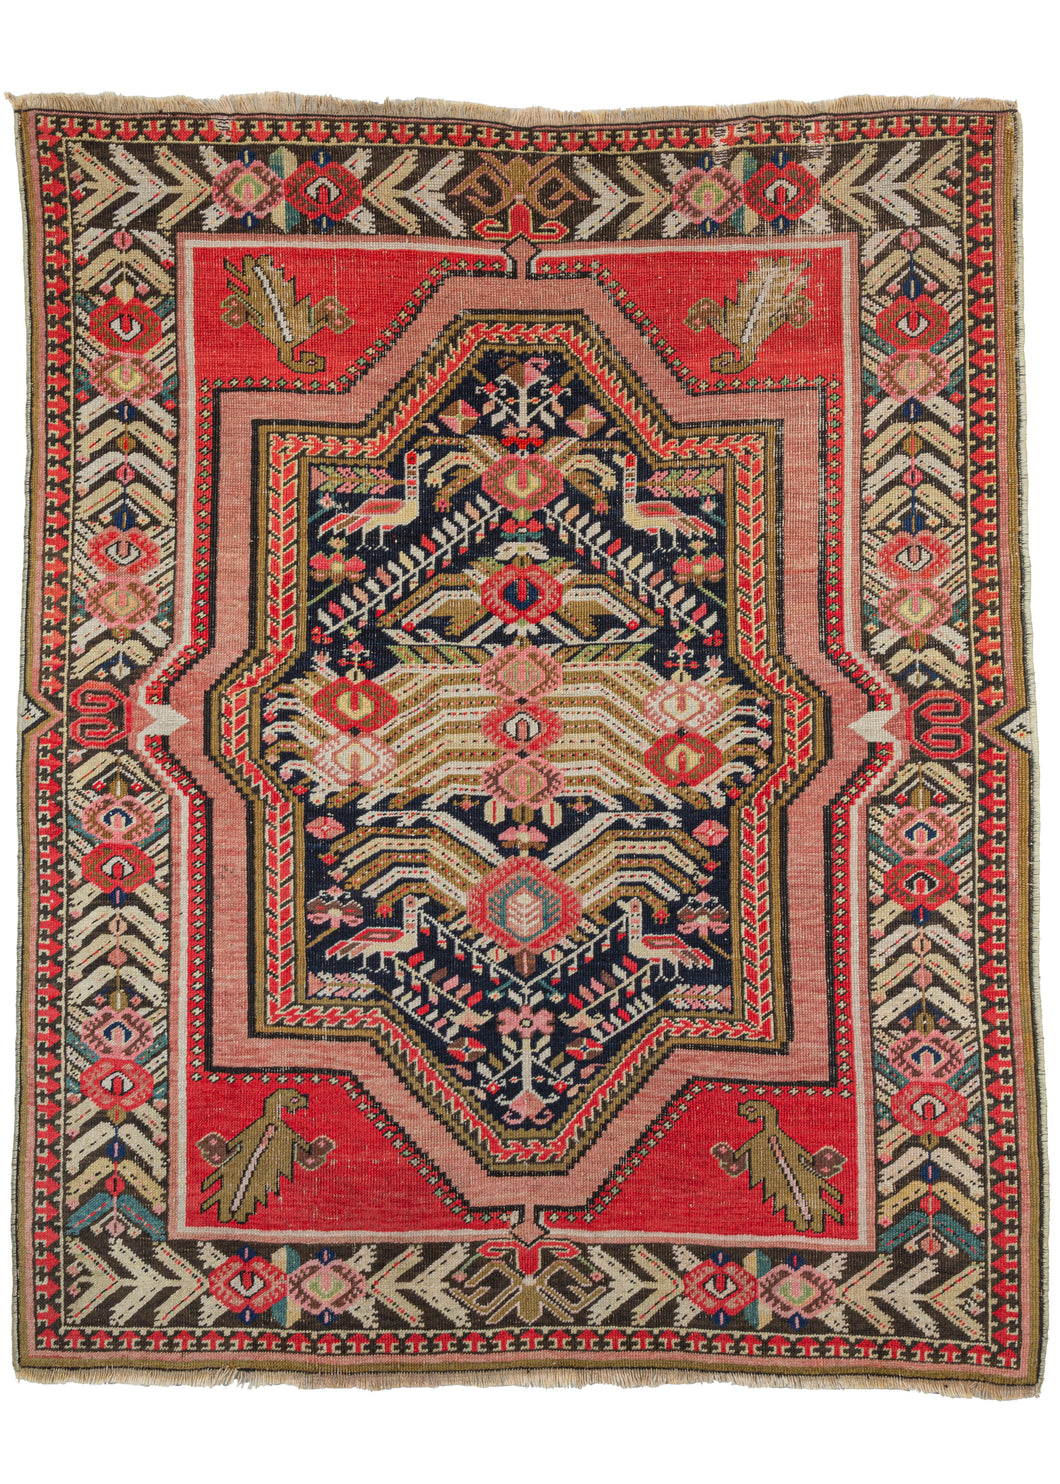 Antique Floral Karabagh scatter rug featuring a powerful medallion of angular leaves, rose-inspired palmettes, and a depiction of birds in red, pink, green, brown ivory, and gold on a black ground. Very baroque in feel the medallion crosses over in the border and is flanked by four cornices. Each cornice features a single leaf with a strong personality. The whole is framed by rows of angular leaves broken up by the same pairing of rose palmettes as the field.